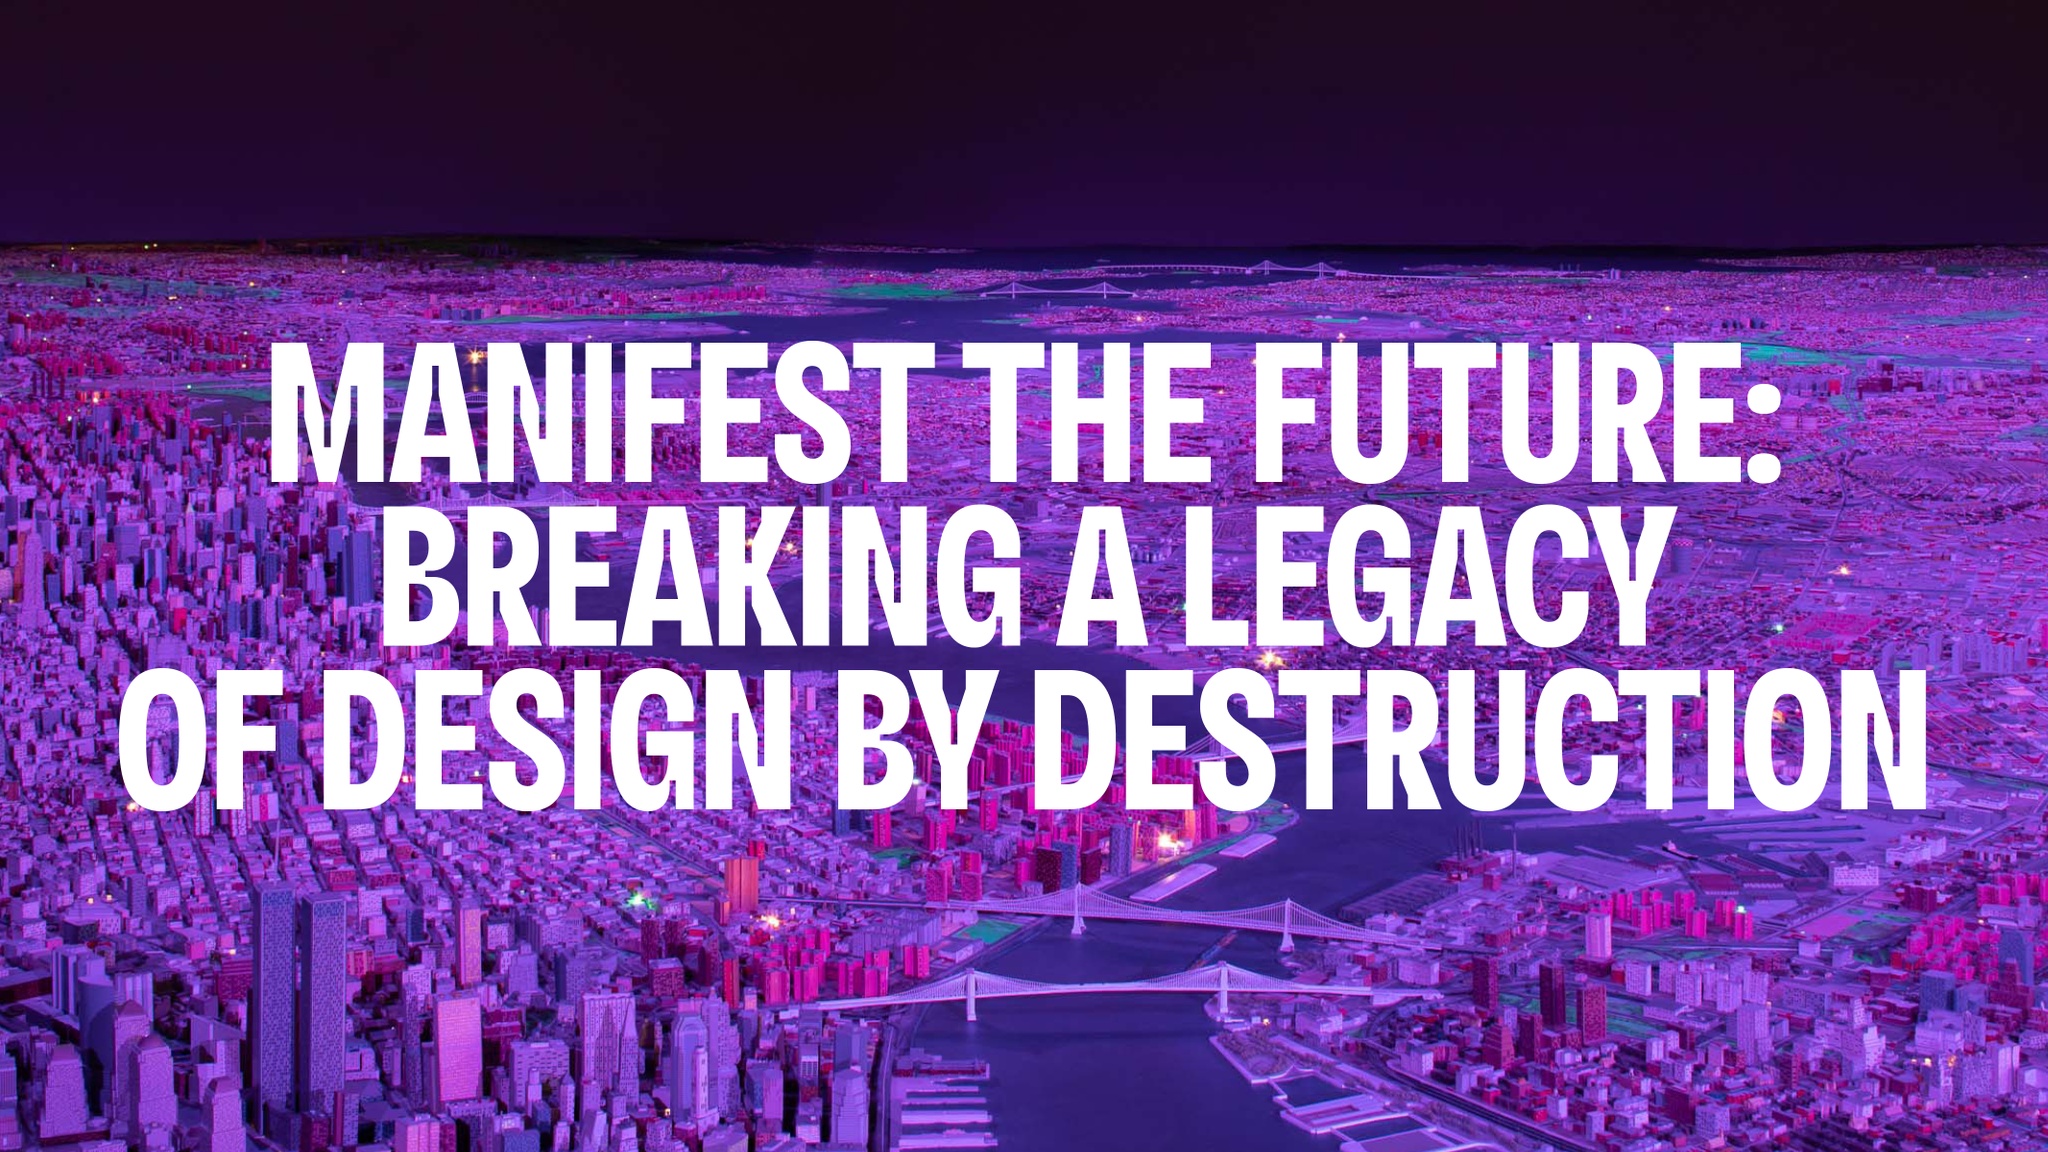 The essay title Manifest thee Future: Breaking a Legacy of Design by Destruction. The words are in white type over a model of New York City bathed in purple light.